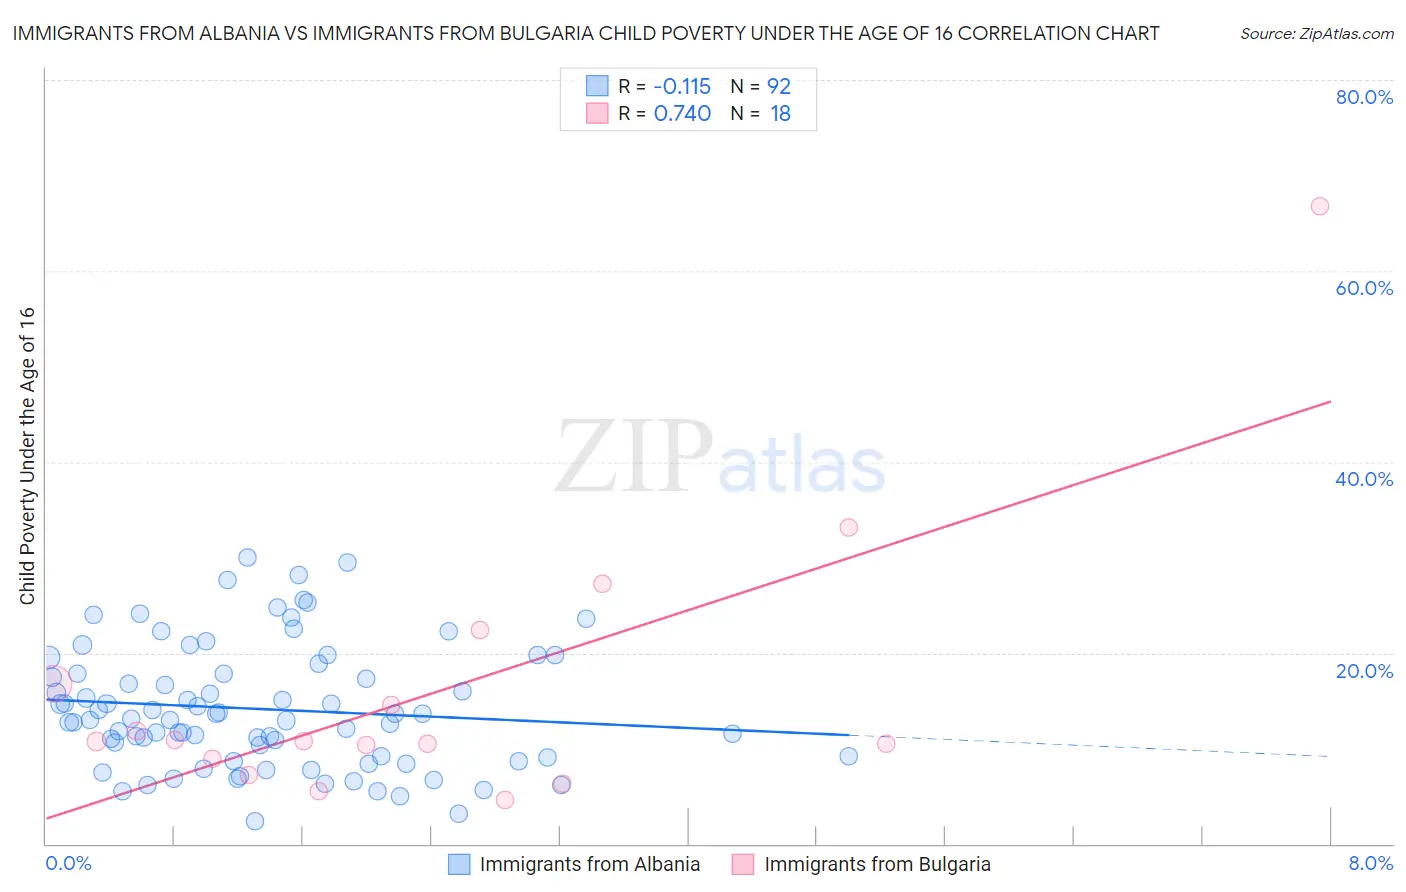 Immigrants from Albania vs Immigrants from Bulgaria Child Poverty Under the Age of 16